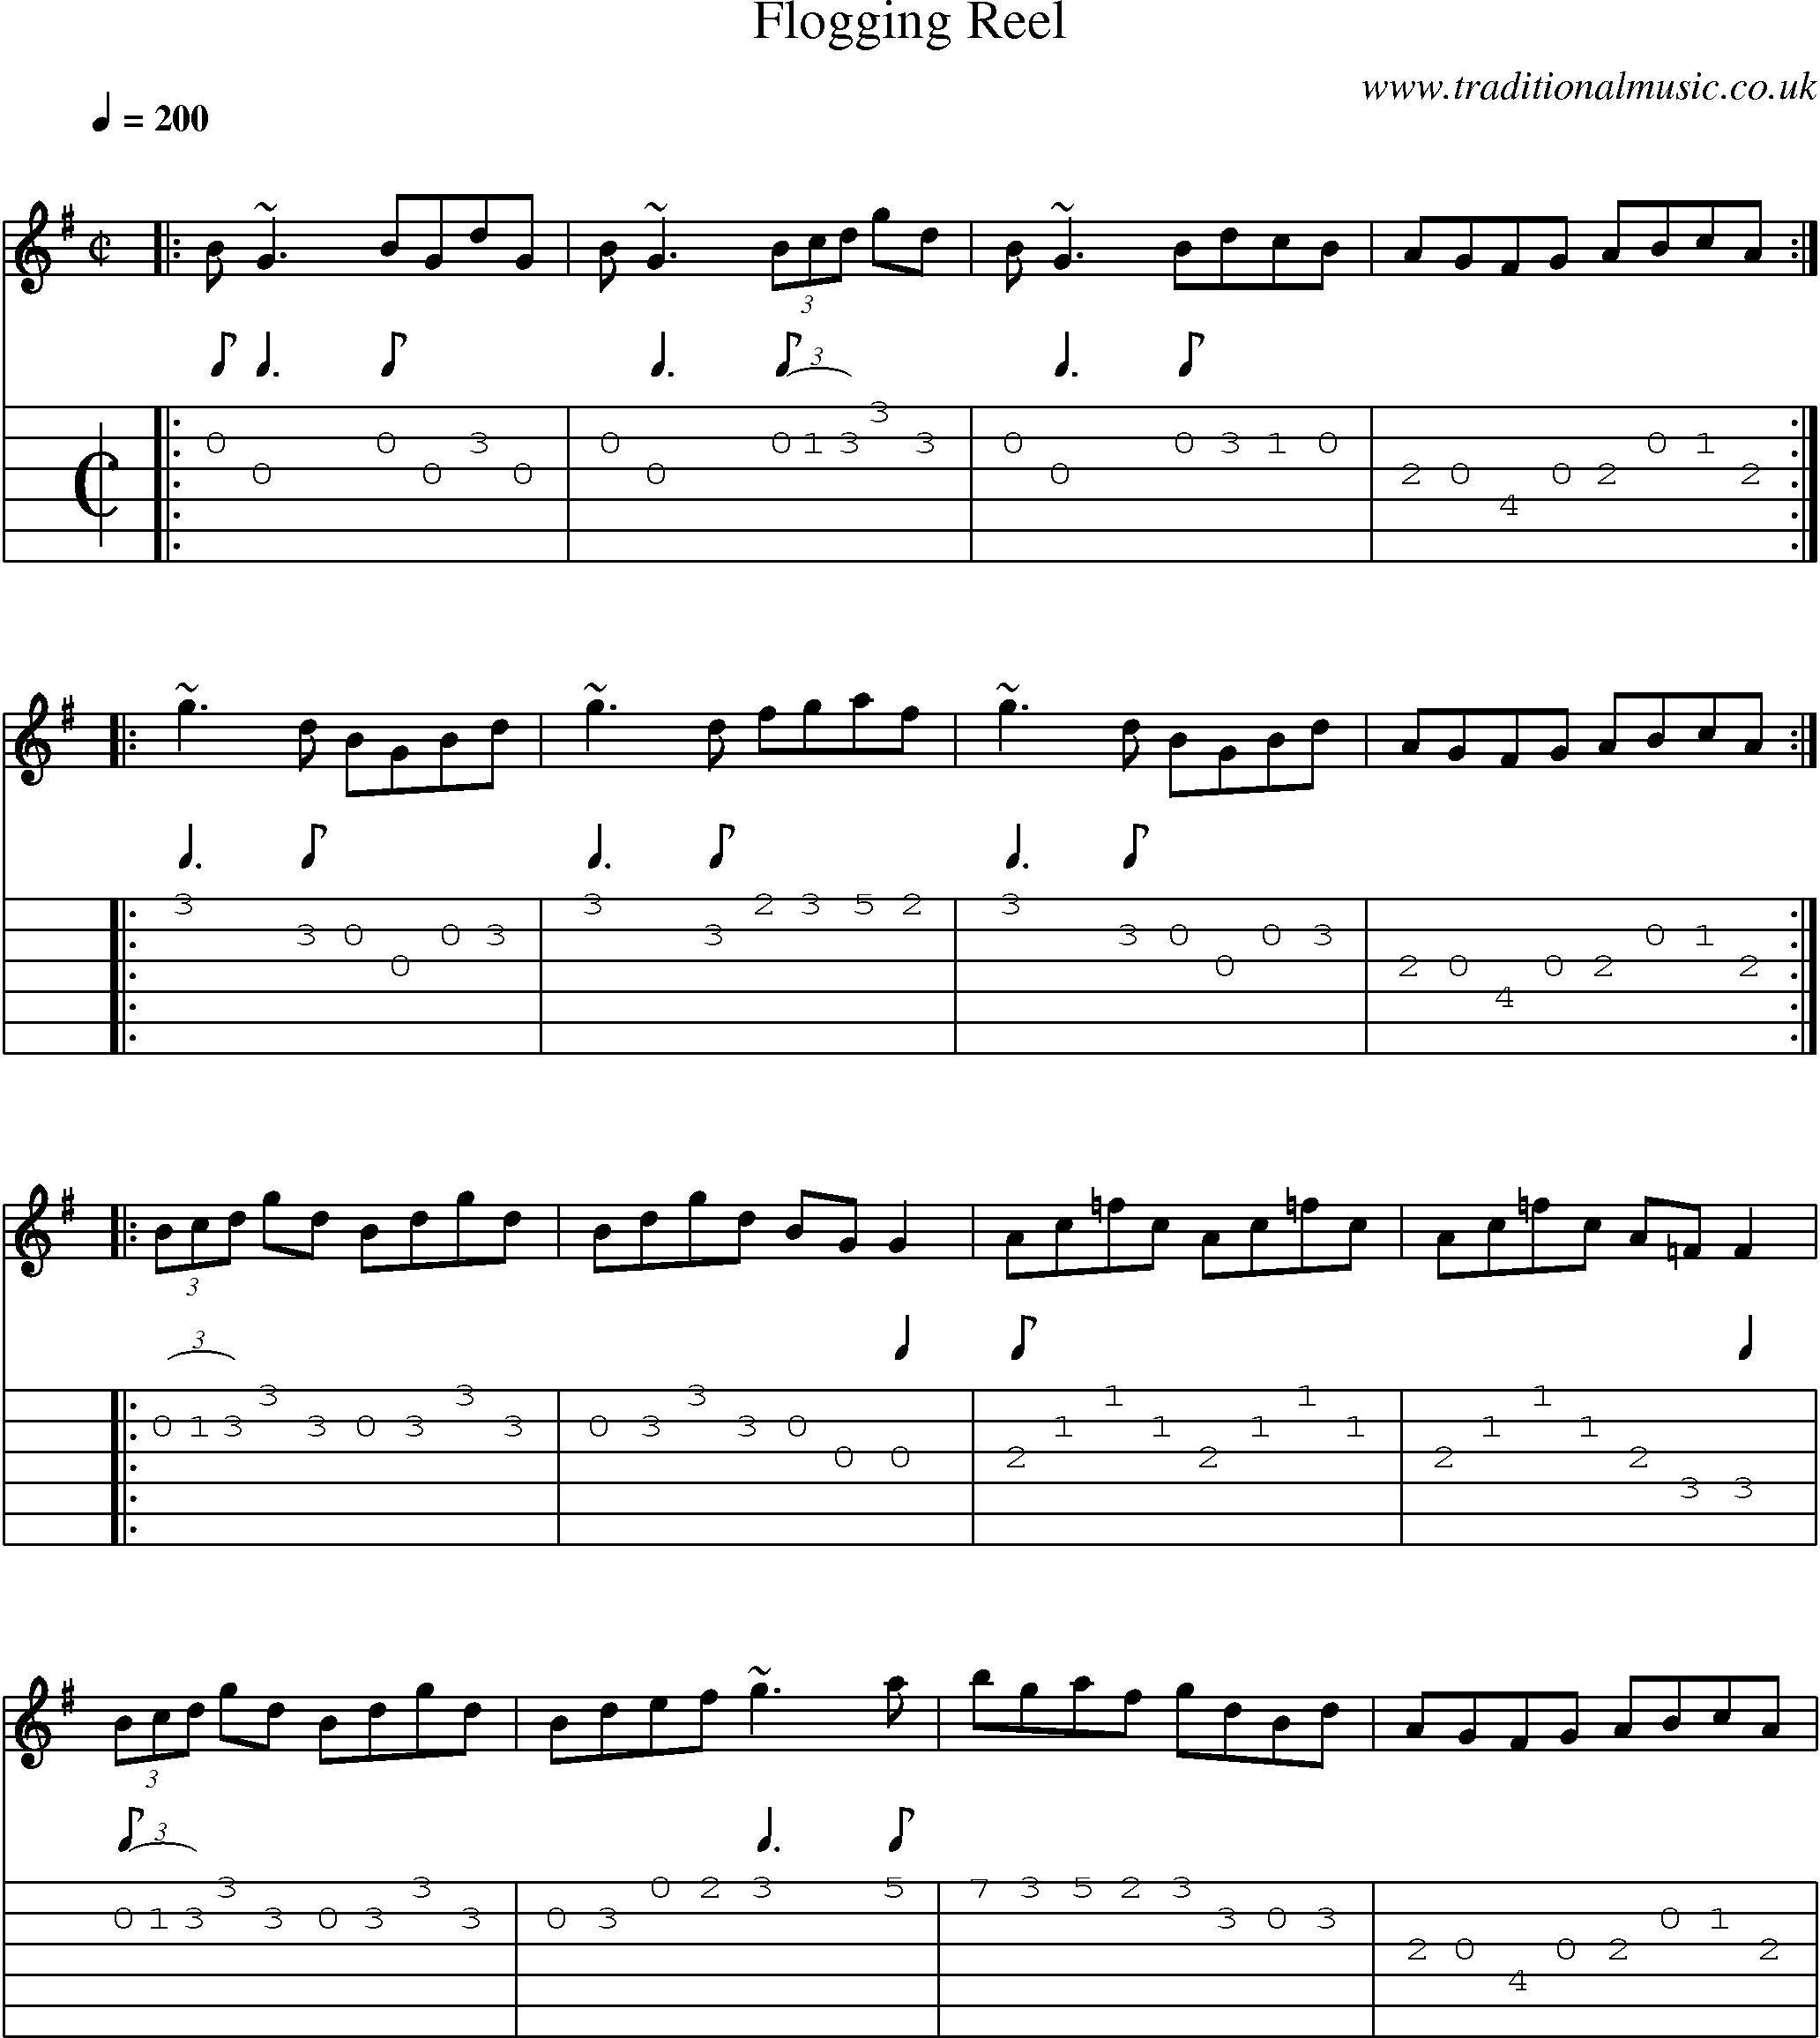 Music Score and Guitar Tabs for Flogging Reel